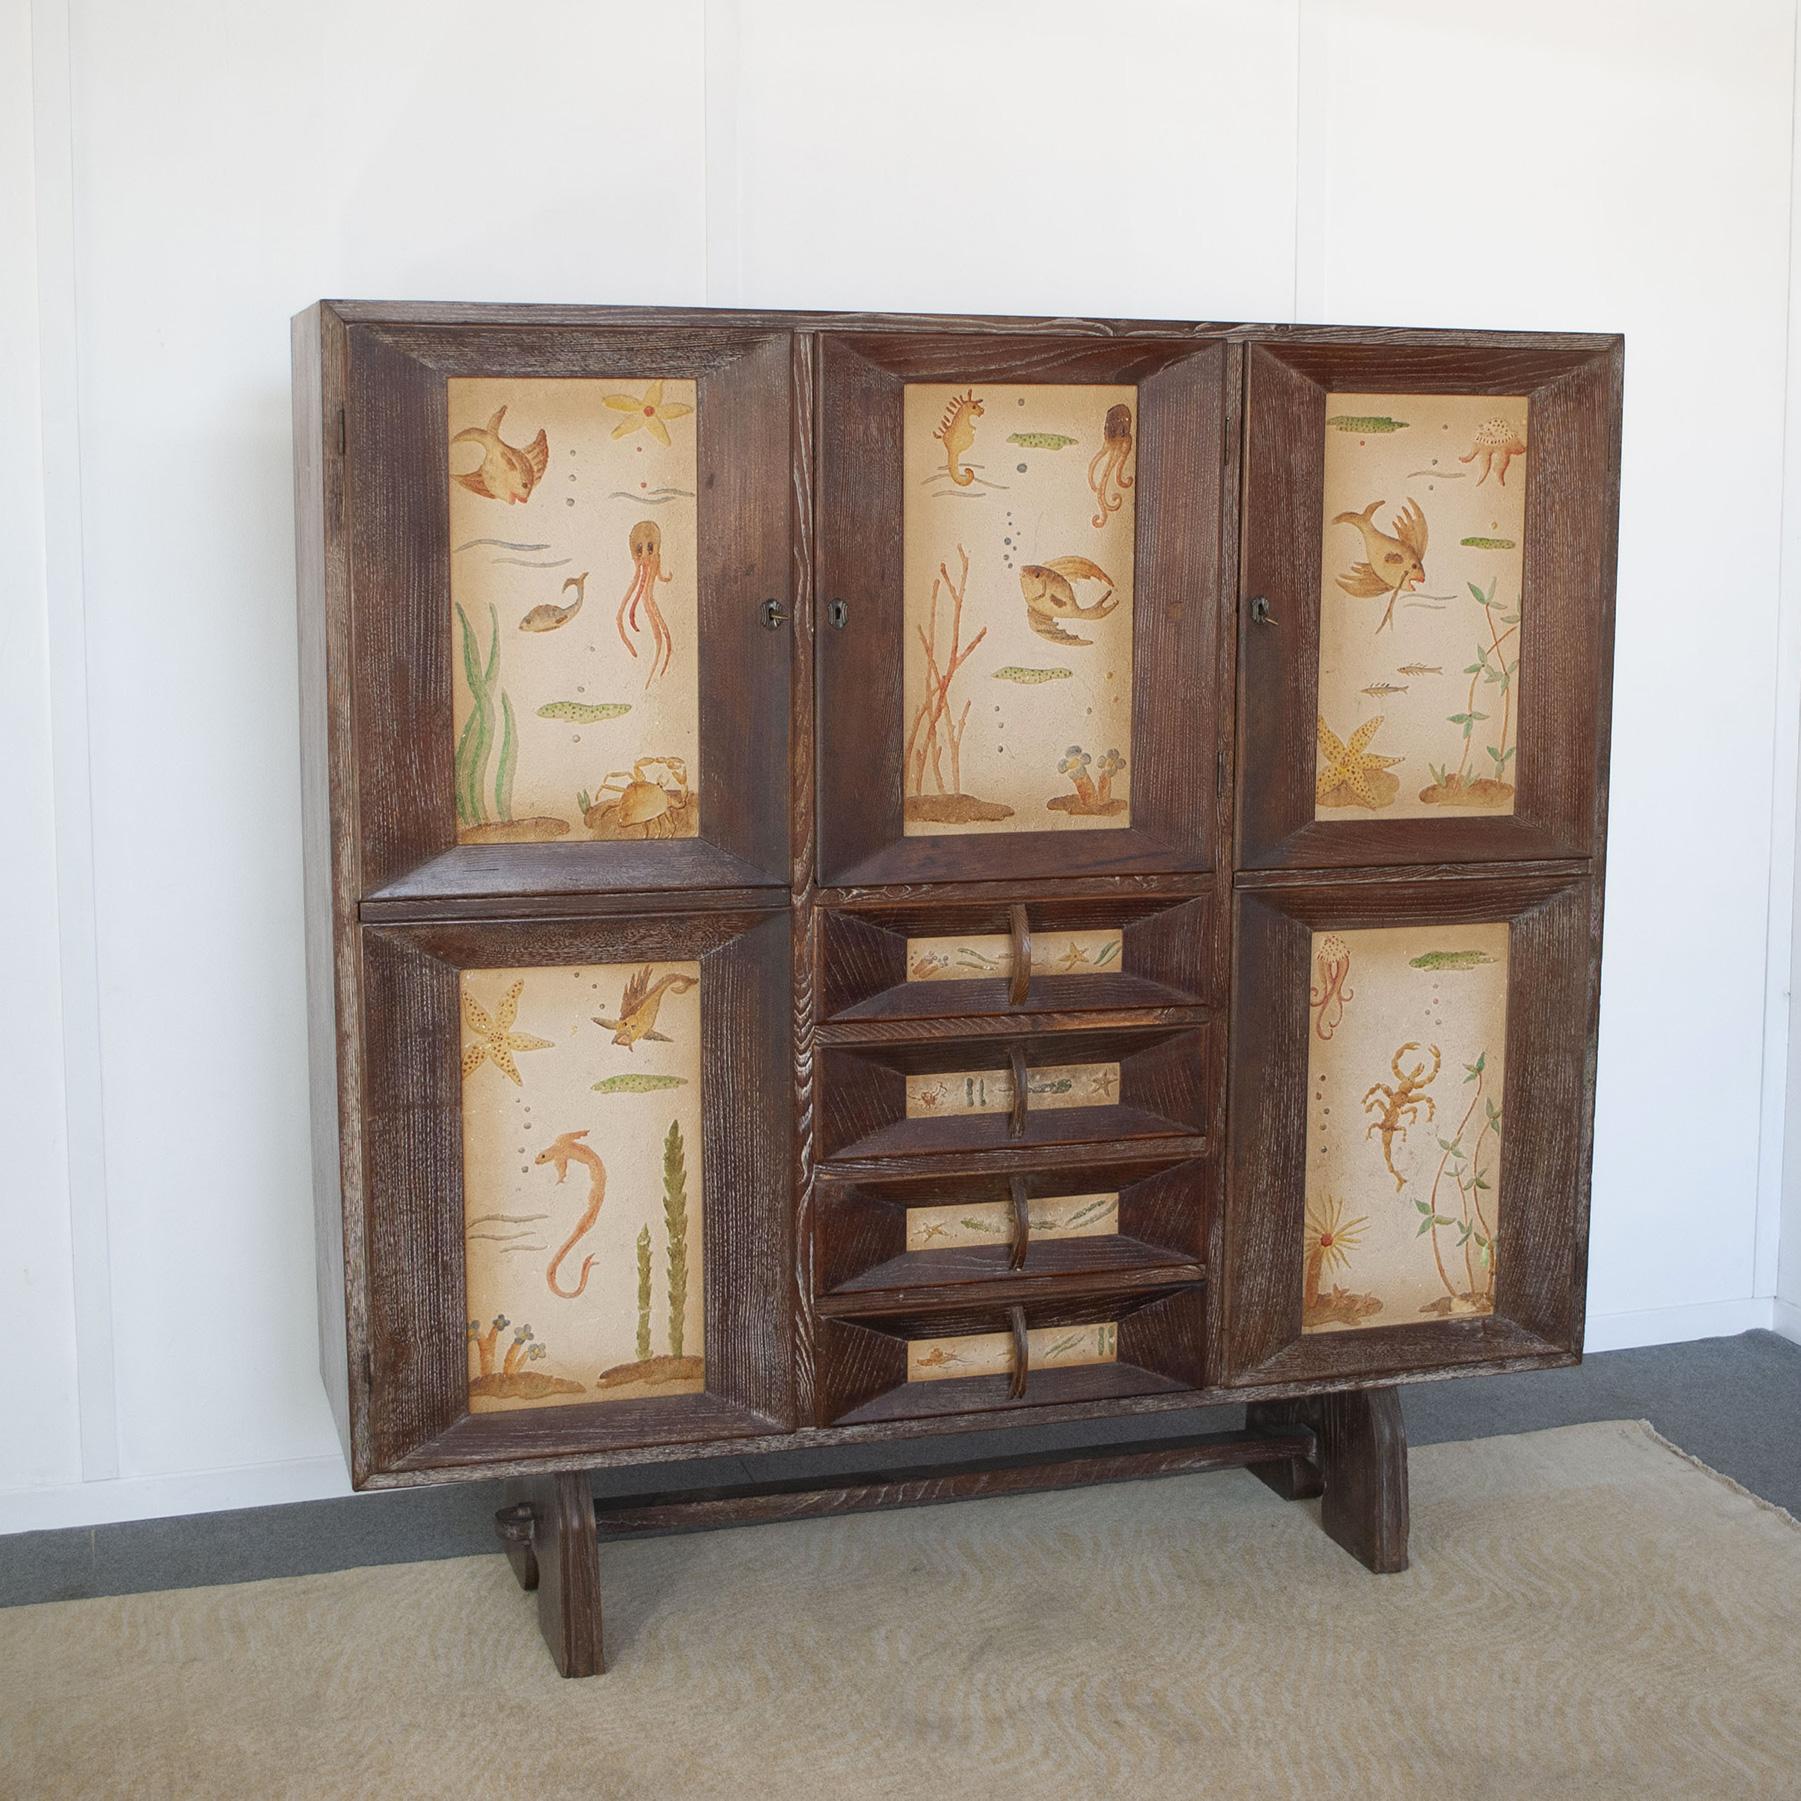 Paolo Buffa  cabinet in beech wood with three  lockable doors and four drawers. The doors and drawers have relief decorations of marine environments. Dassi production late 1940s.